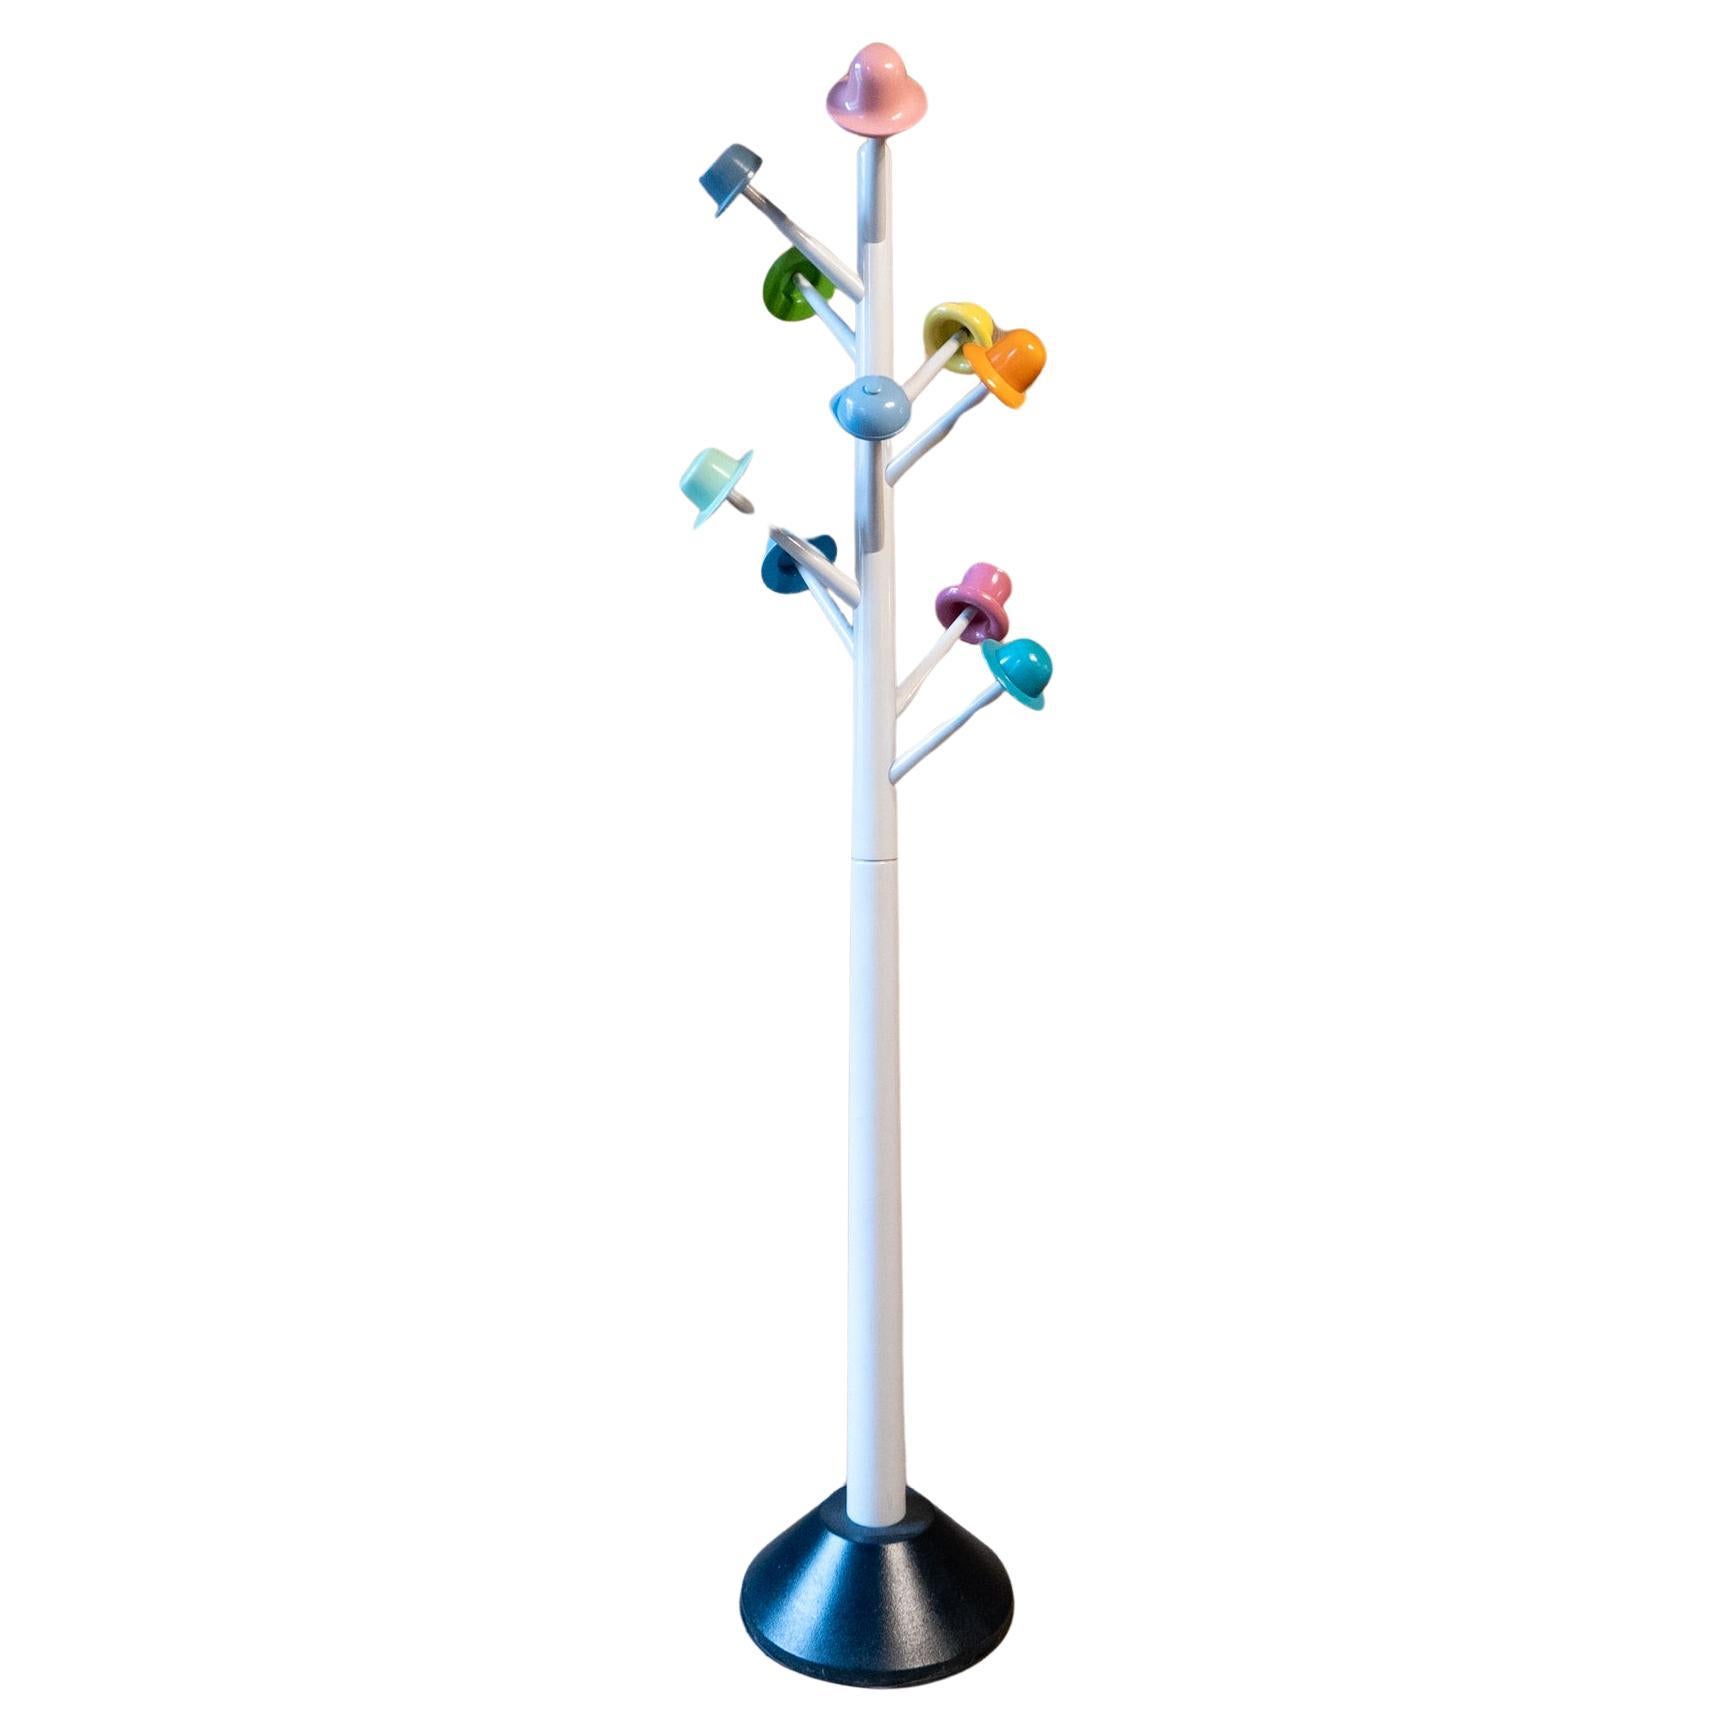 Post-Modern White Metal Coat Rack with Multi-Colored Hooks by Ugo Nespolo, 1980s